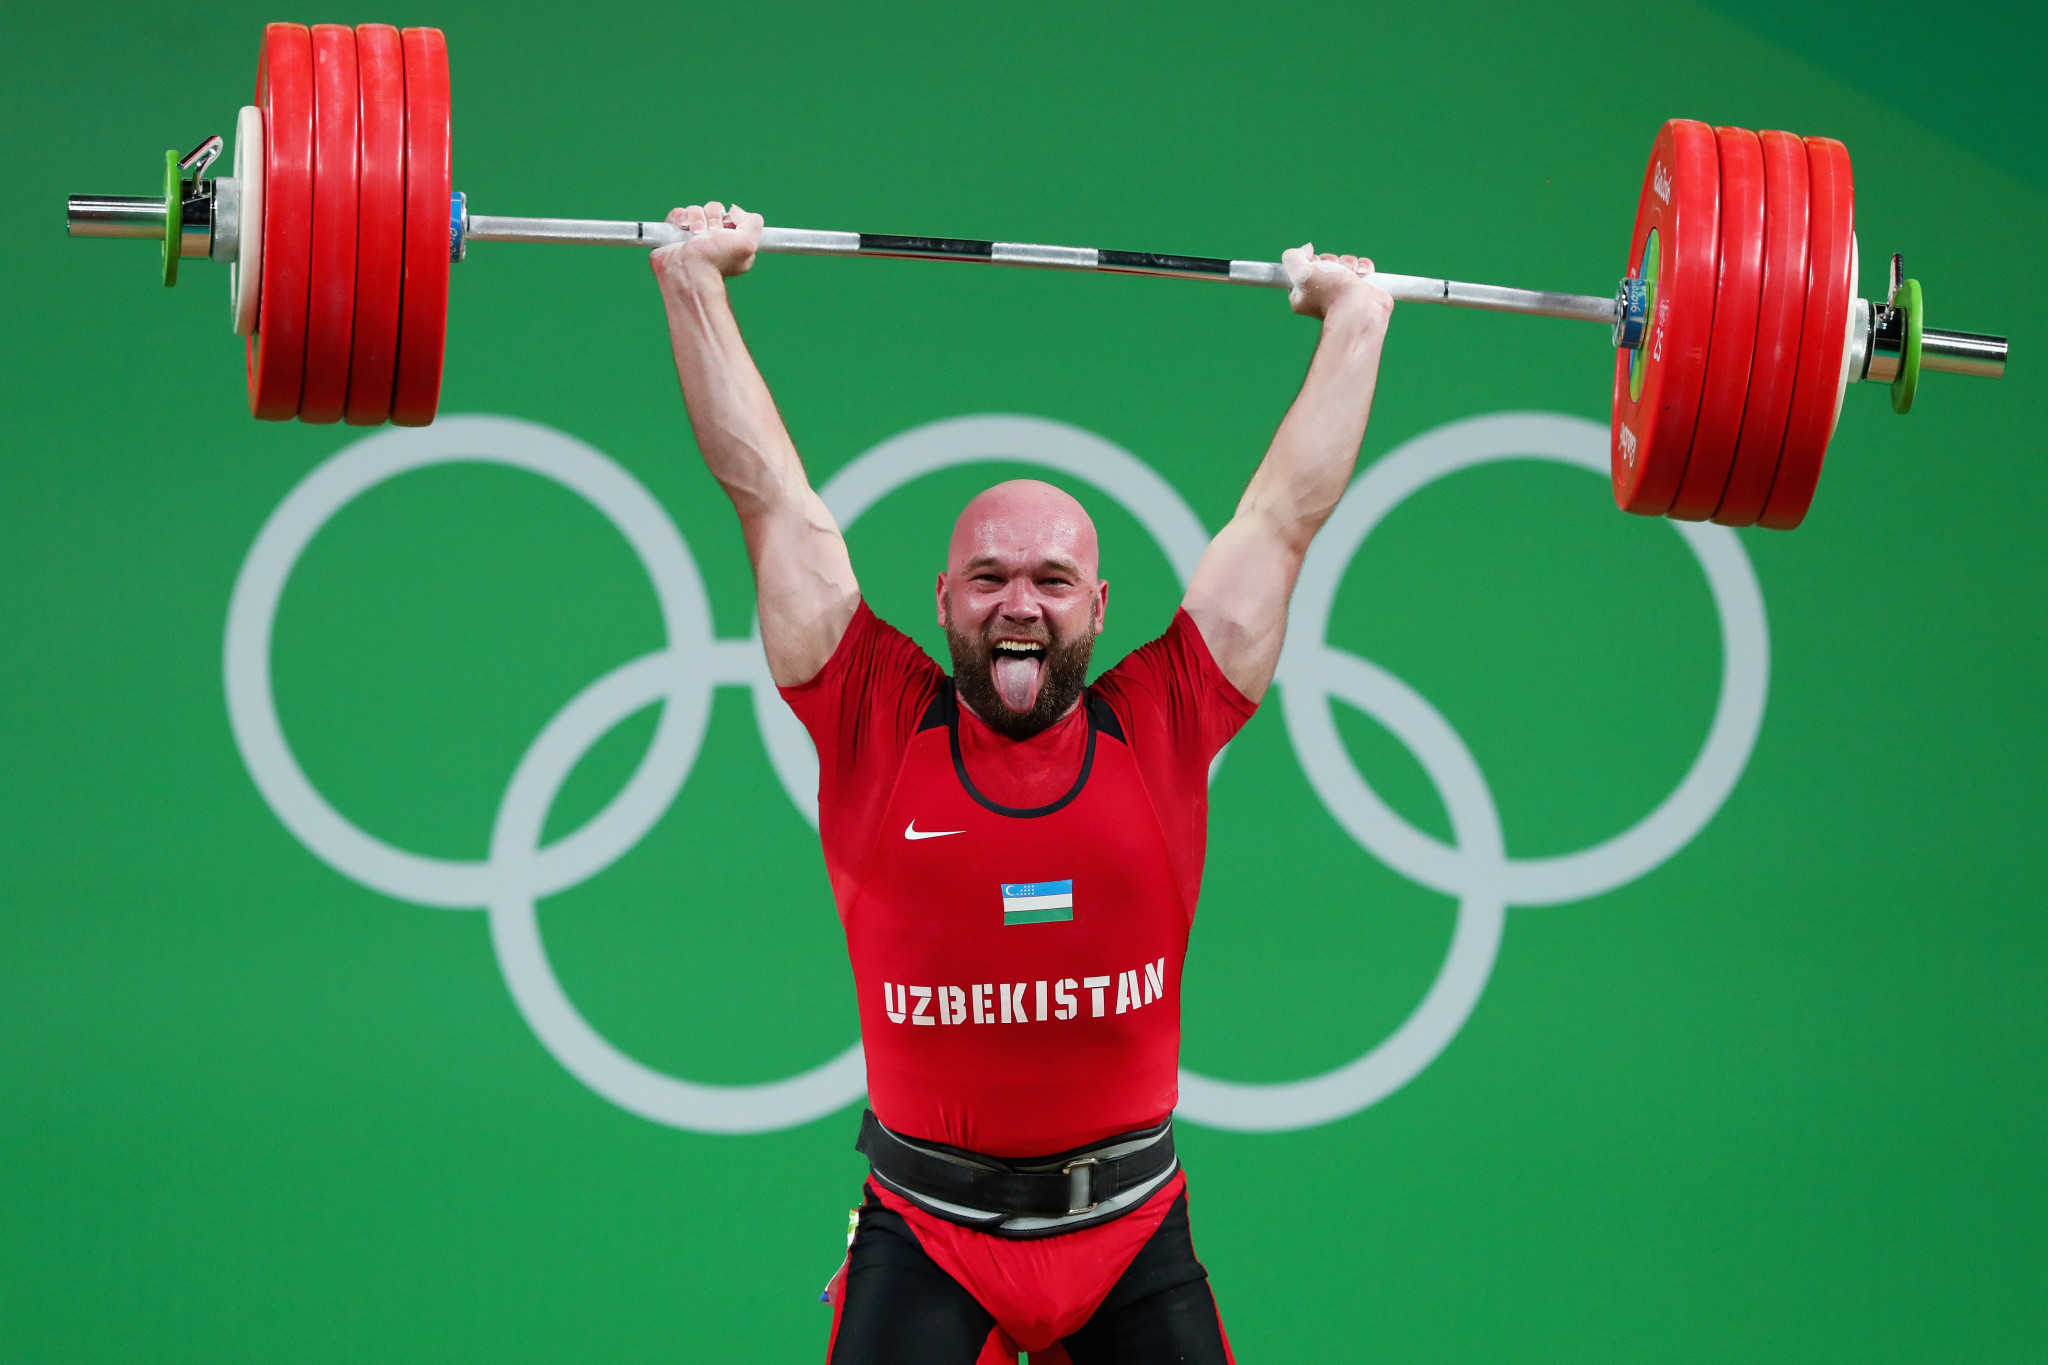 Ruslan Nurudinov could line up alongside Moradi at the Asian Championships, after dropping down to the 102 kilograms category ©Getty Images